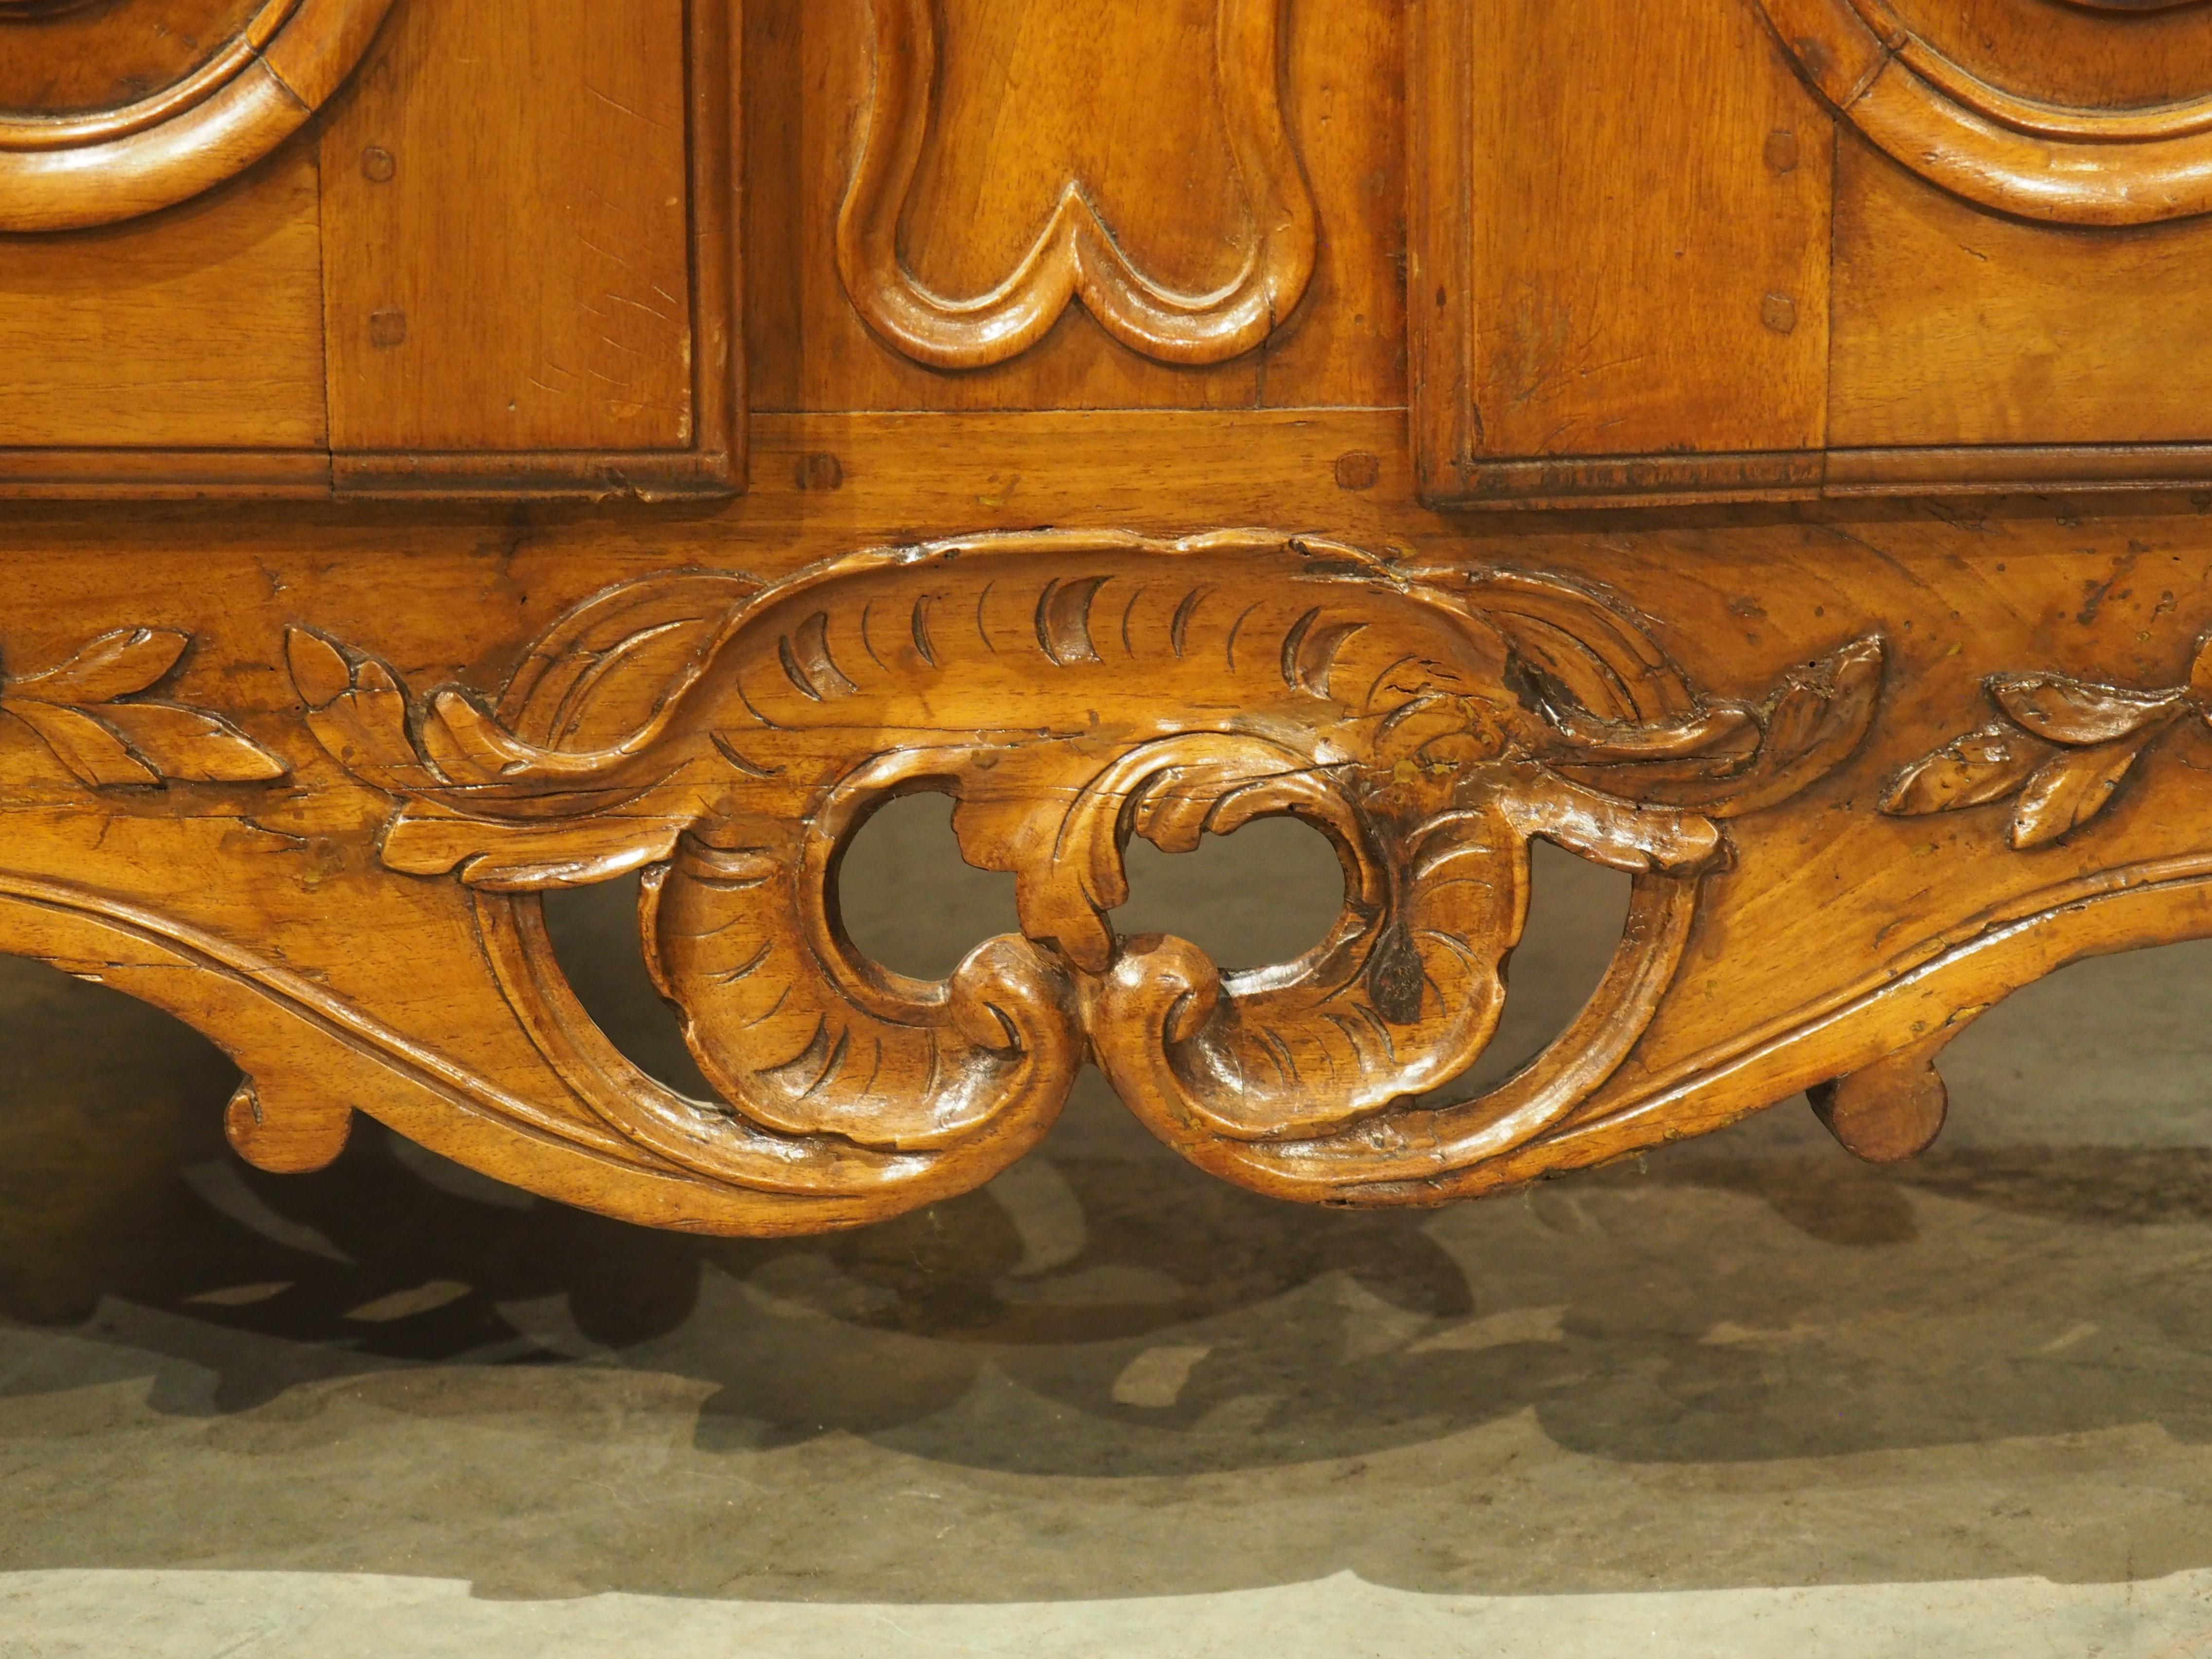 Metal Circa 1750 Carved Walnut Wood Buffet Crédence from Nîmes, France